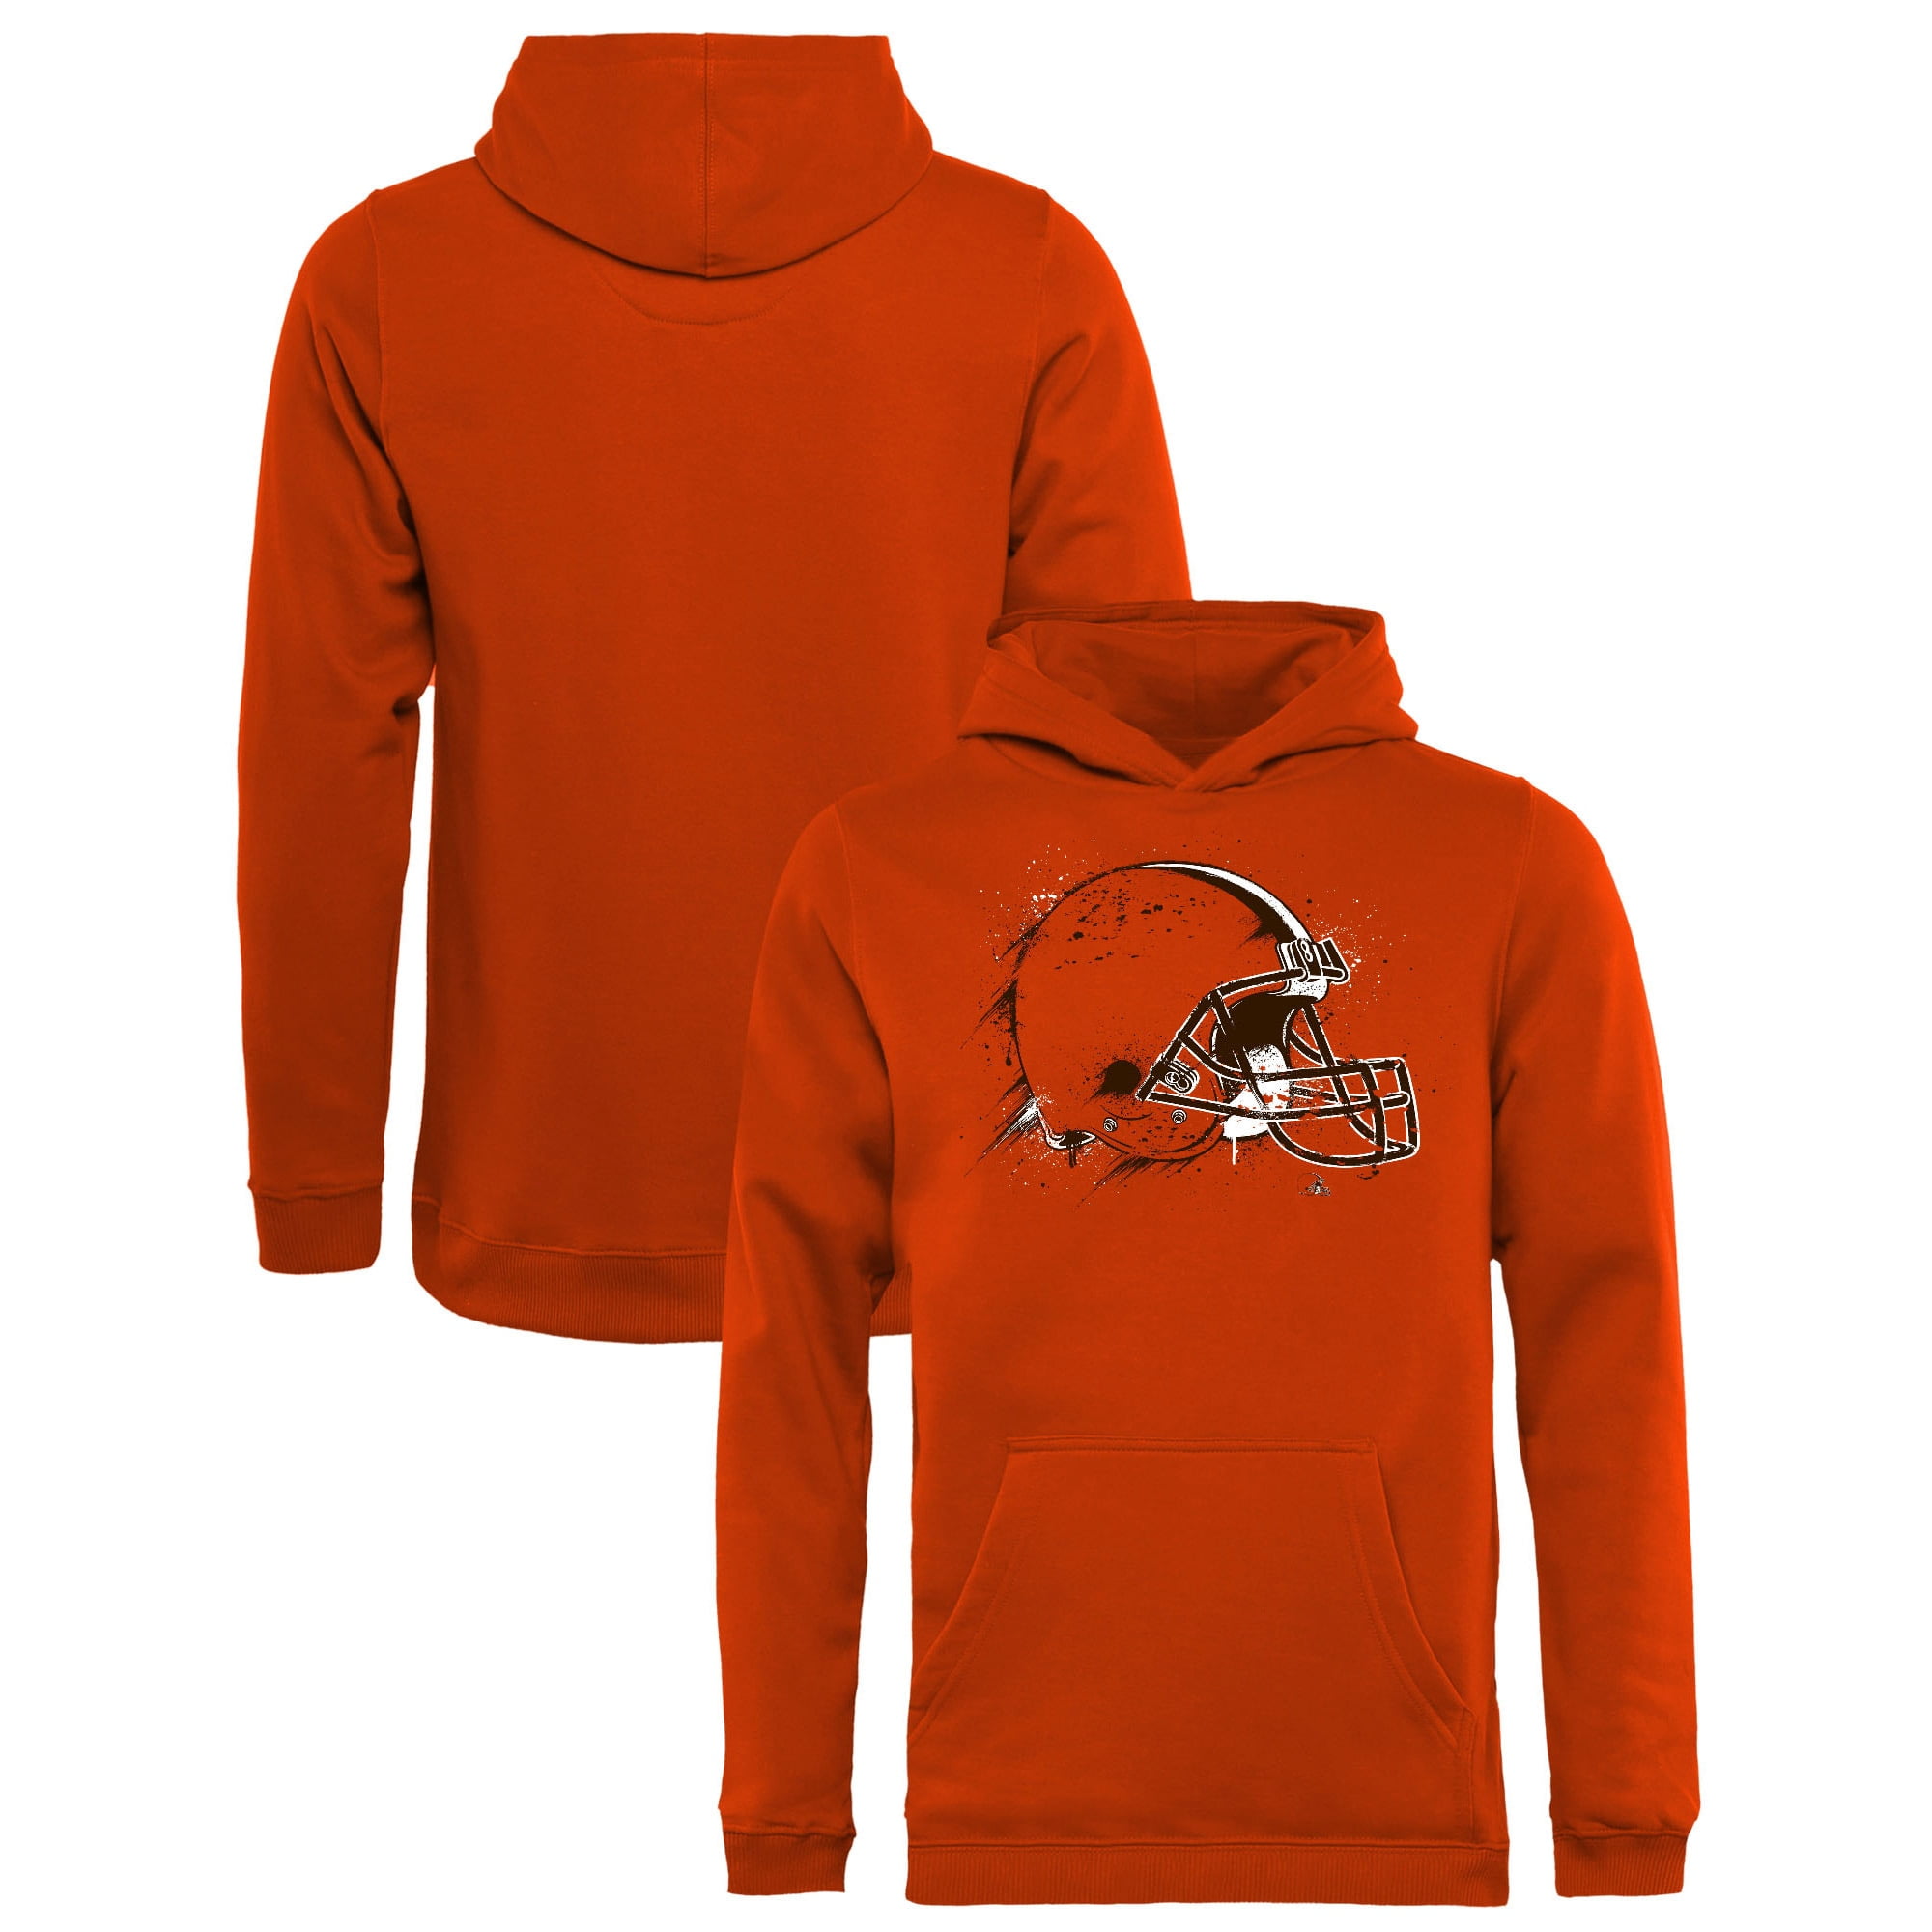 cleveland browns hoodie clearance